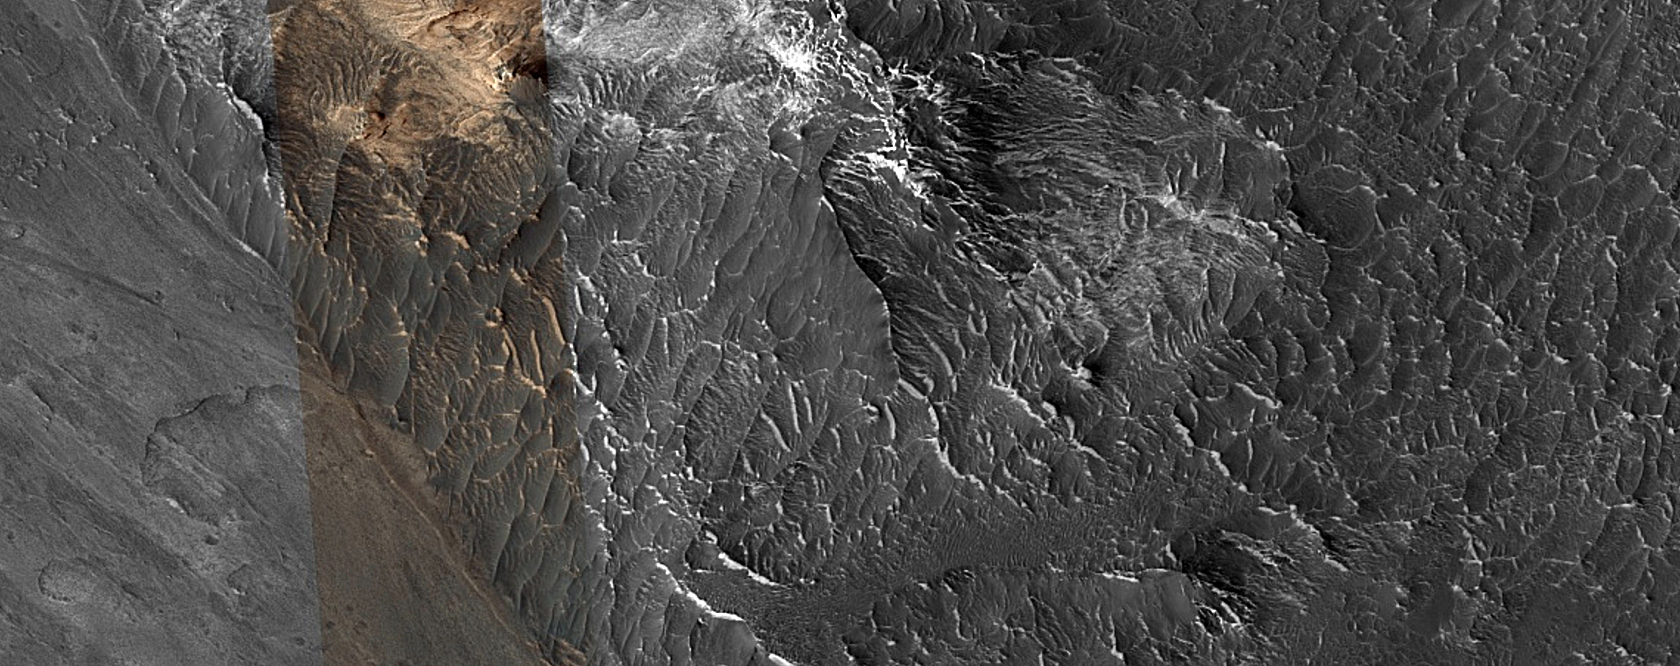 Hydrated Sulfate-Rich Terrain in Melas Chasma